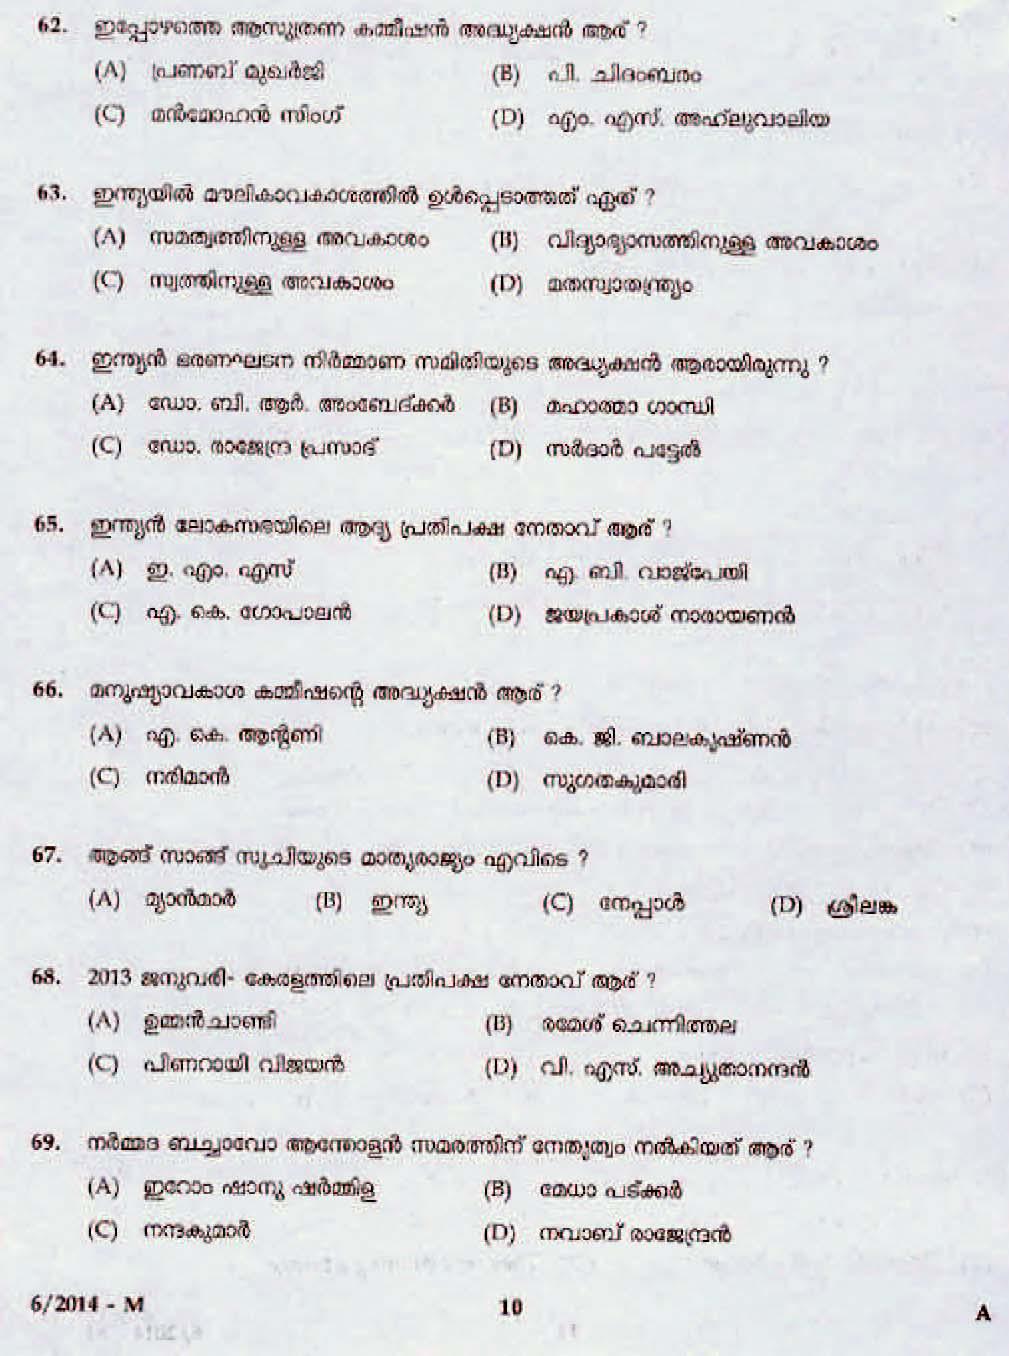 LD Clerk Question Paper Malayalam 2014 Paper Code 062014 M 8